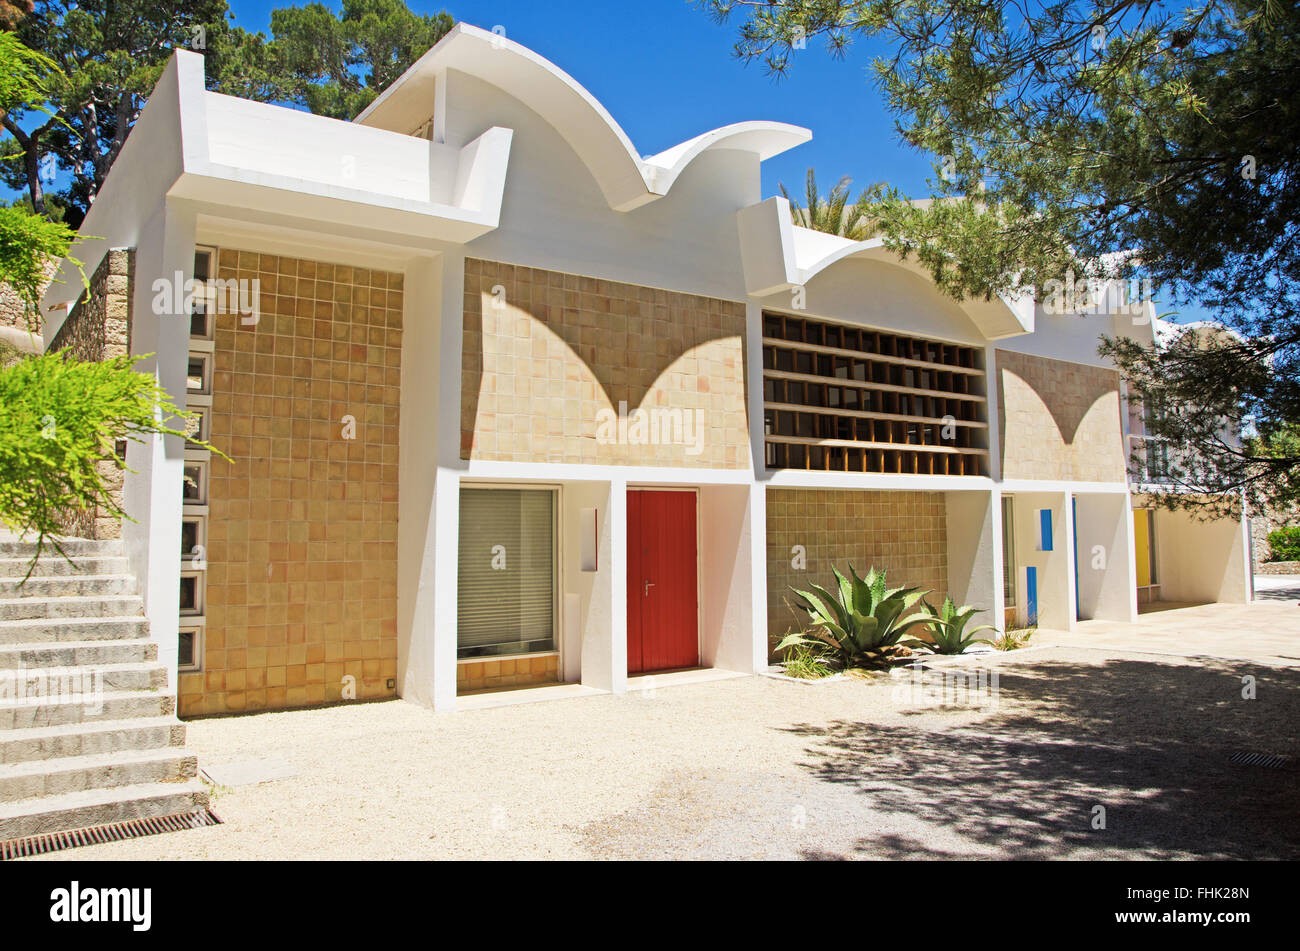 Palma, Mallorca, Balearic Islands, Spain: the studio Sert of the Pilar and Joan Miró Foundation, the  museum dedicated to the work of Joan Miró Stock Photo